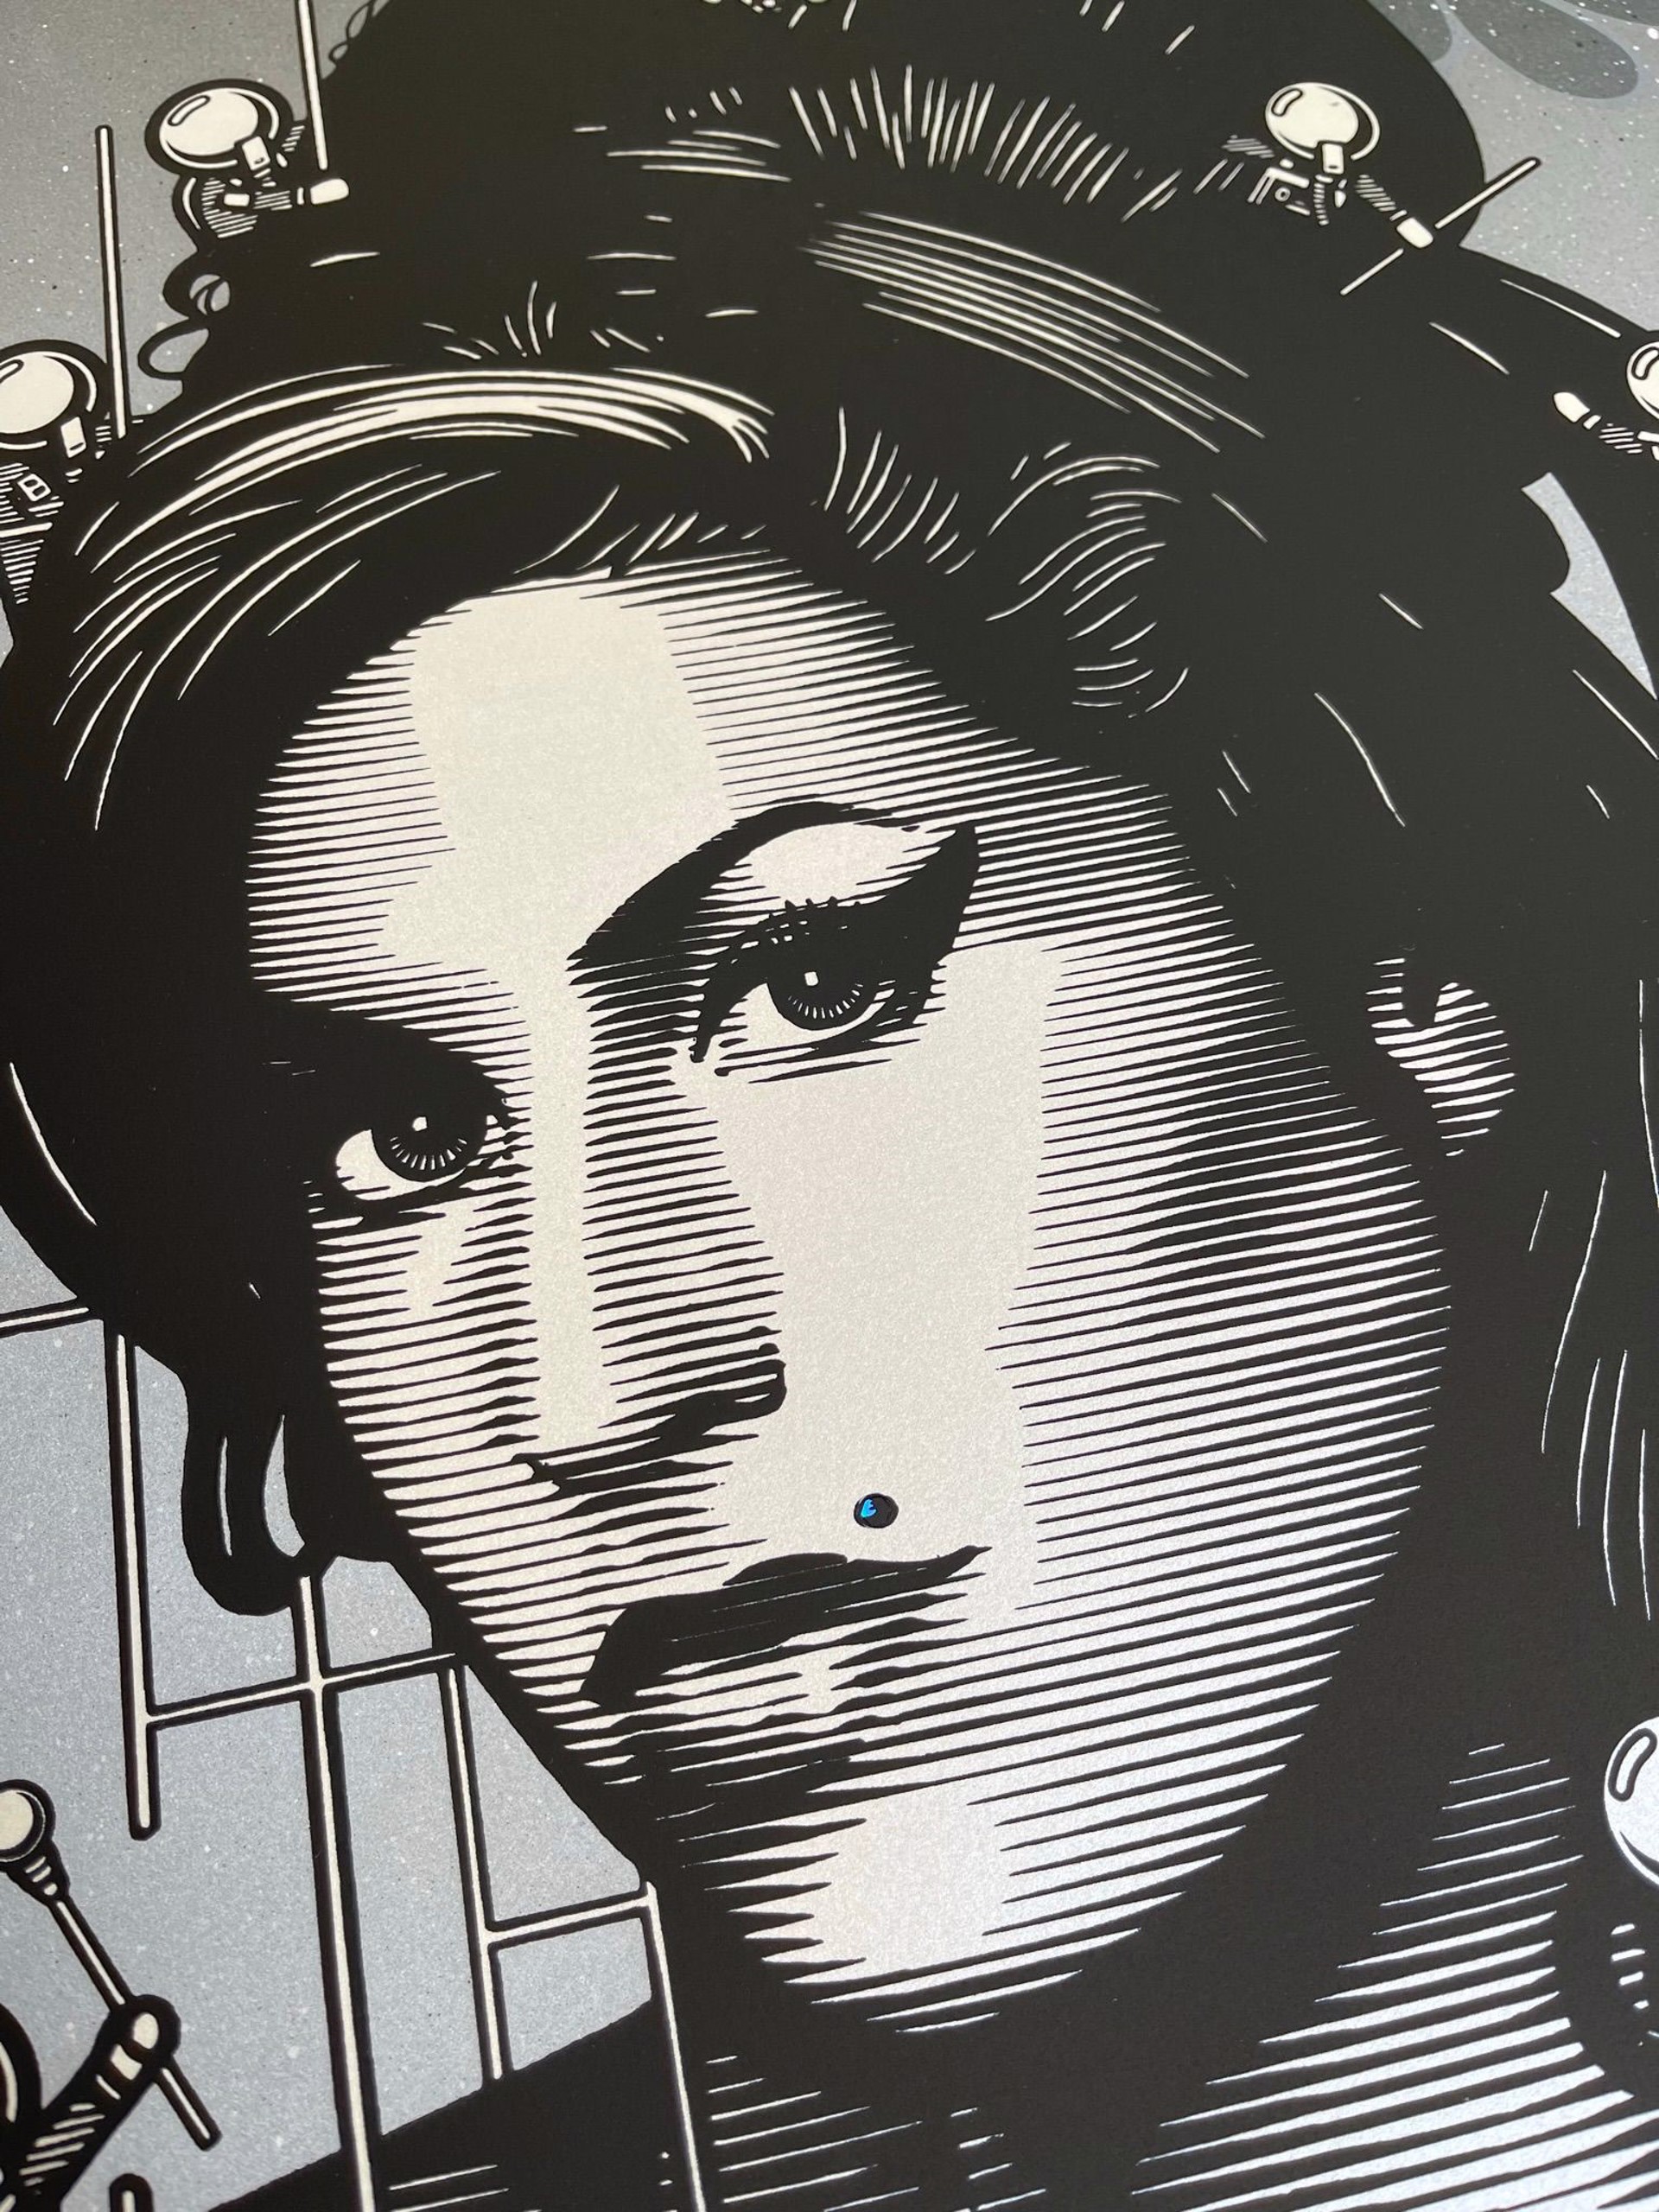 Amy Winehouse Hand-Embellished Print by The London Police